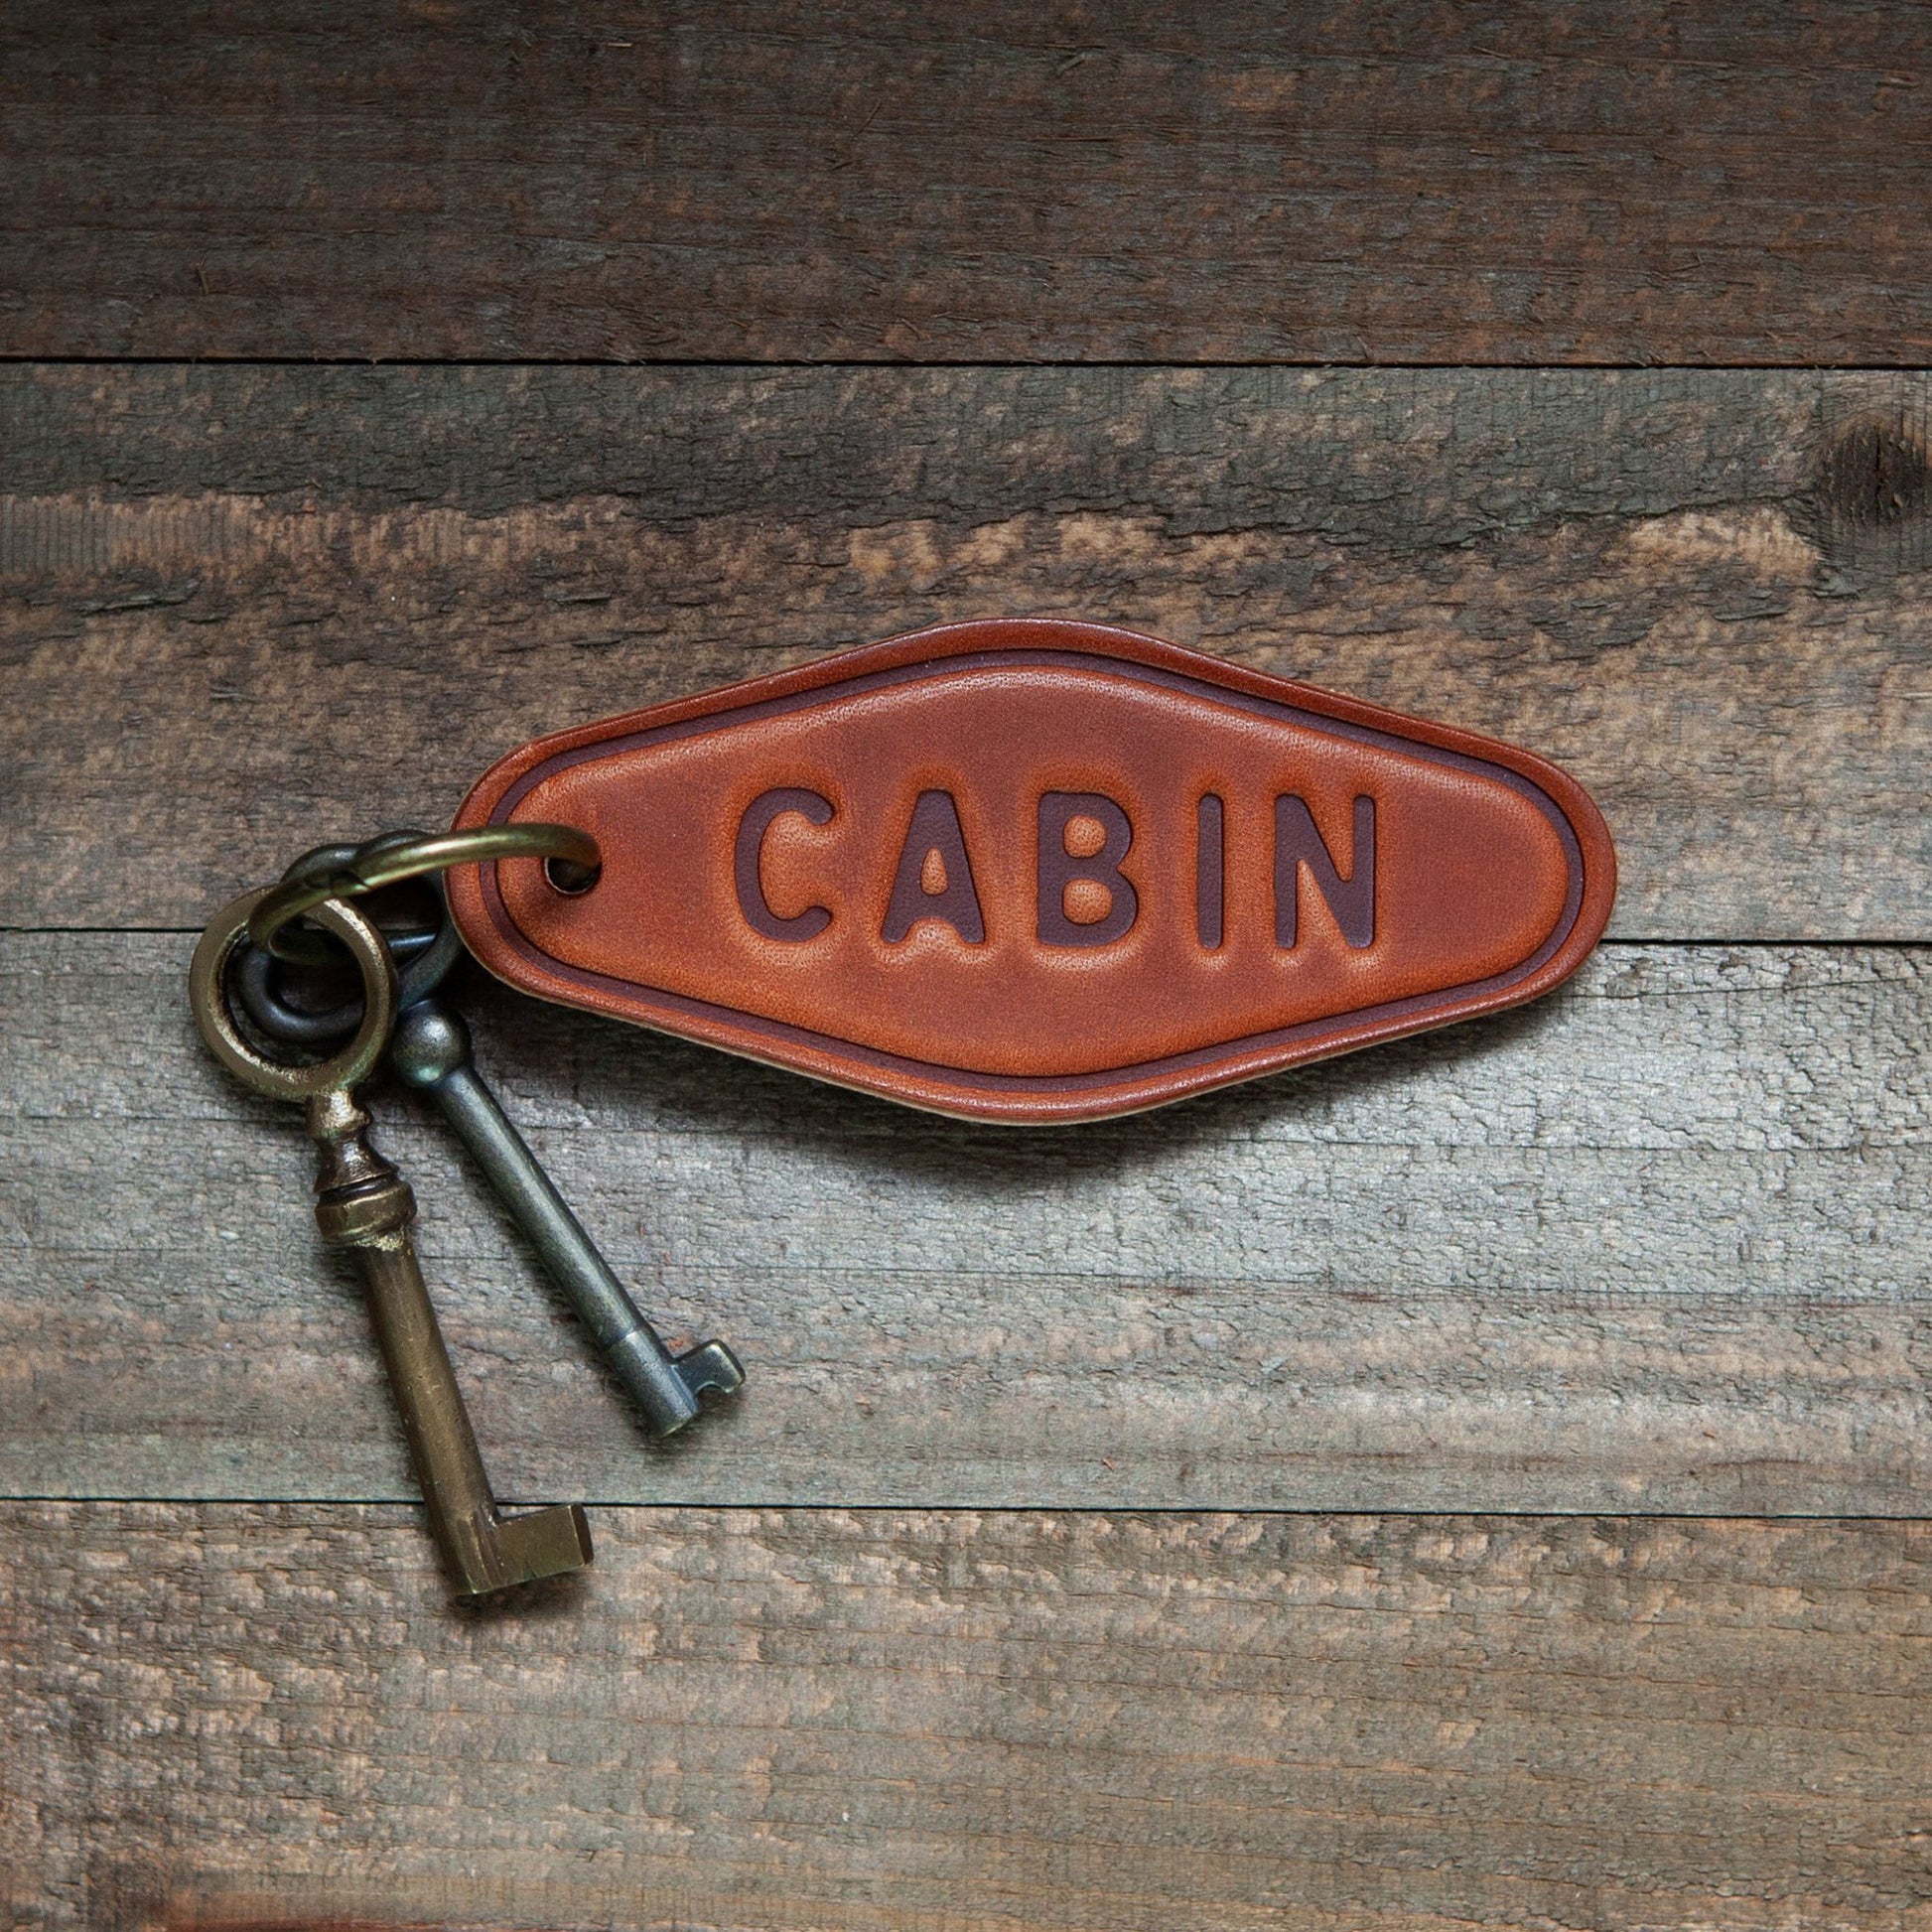 cabin leather keychain cut and pressed by hand from some of the thickest and finest harness leather available.